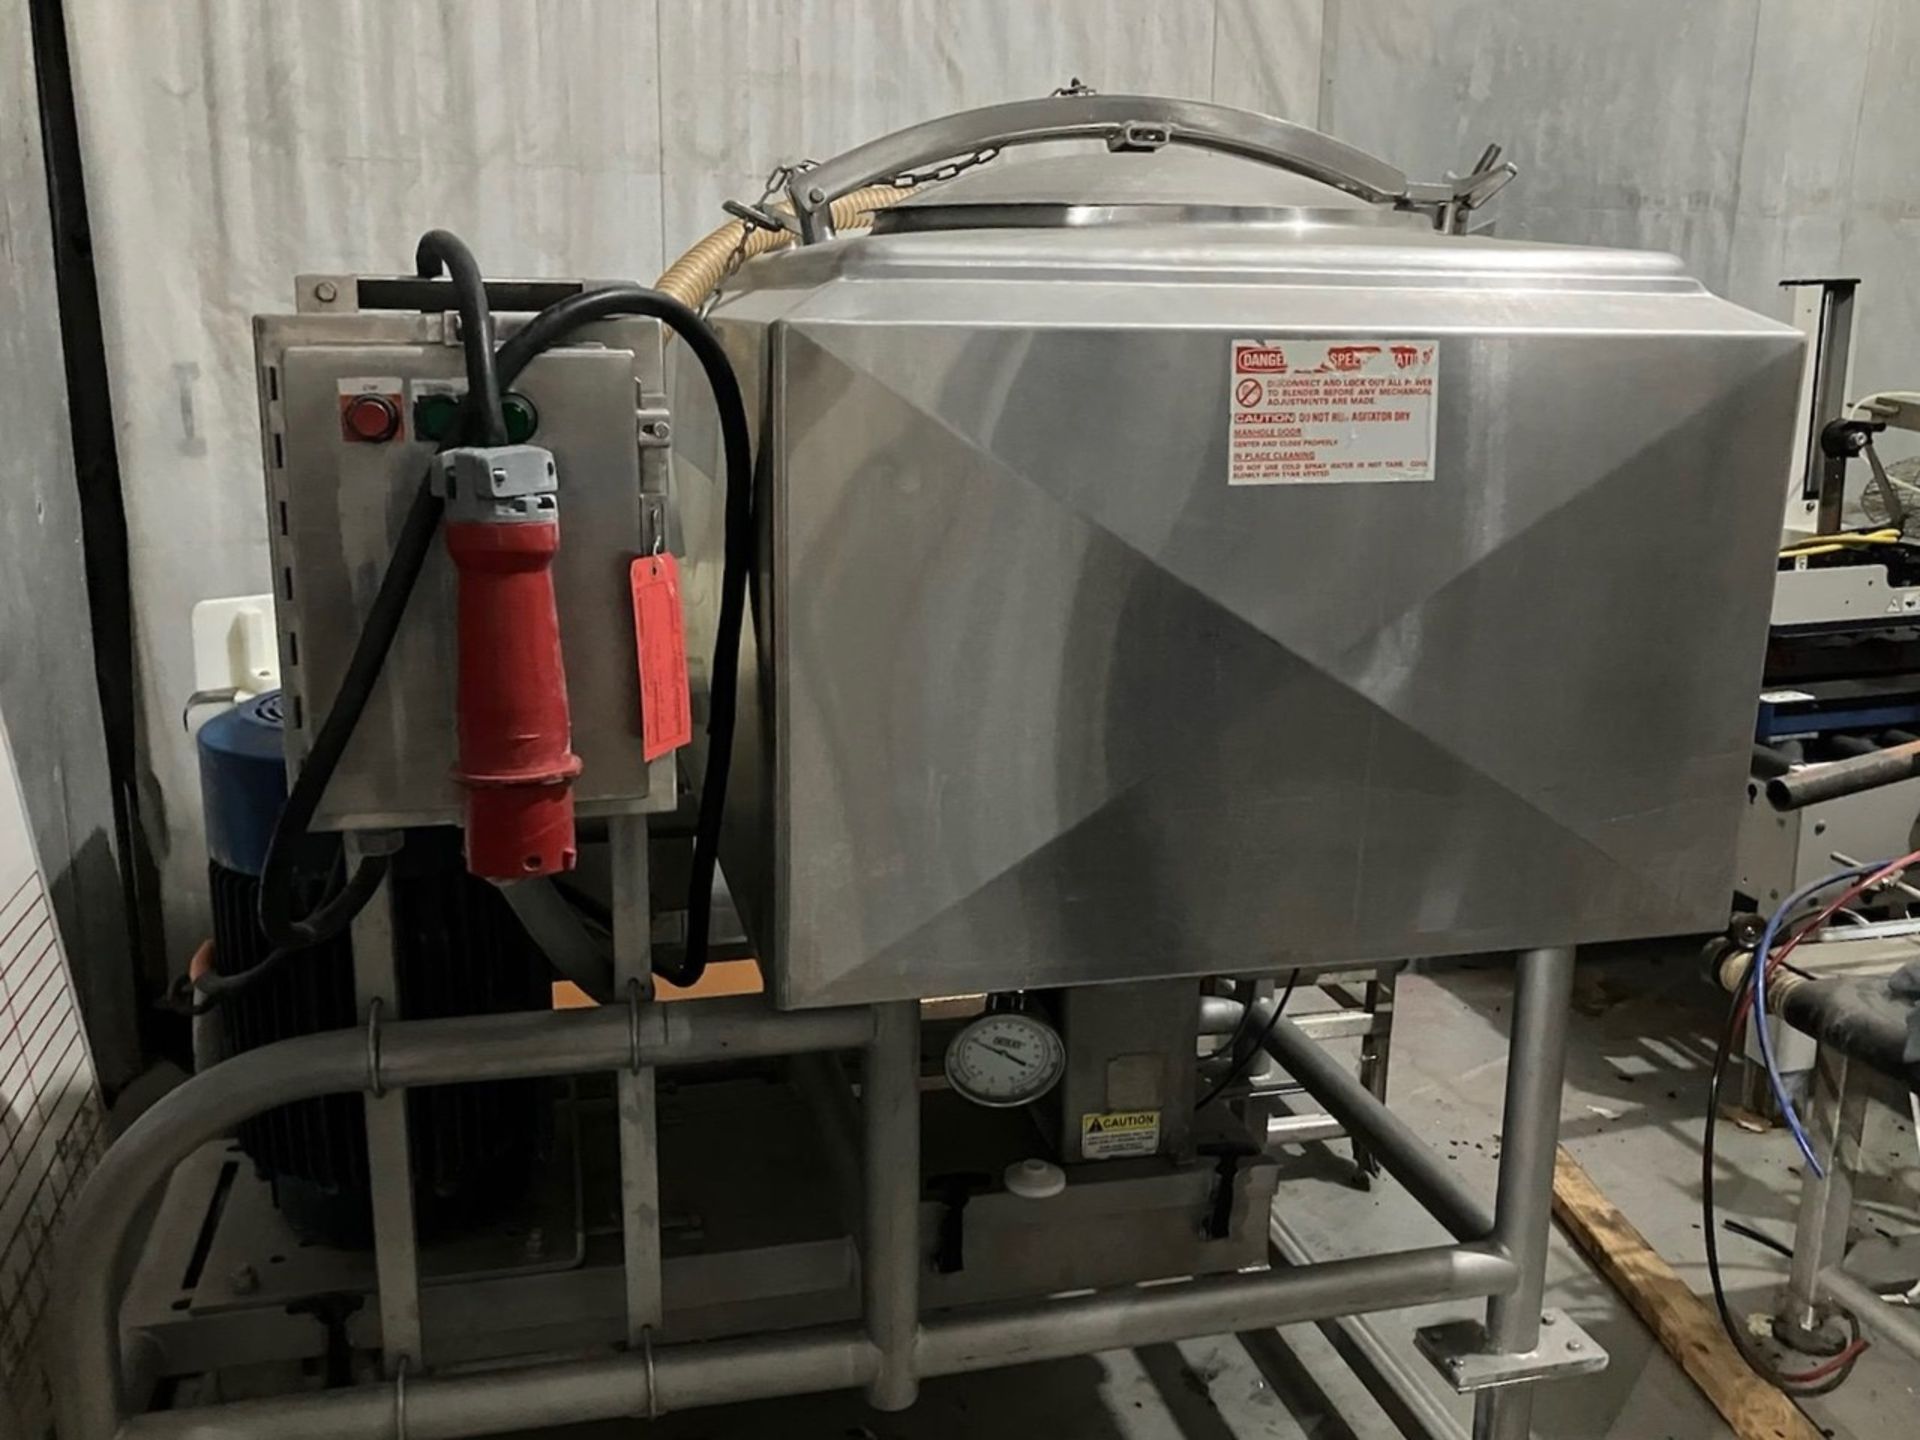 Breddo Likwifier 100 Gallon Square Jacketed Liquifier, Model LOSW, 30 HP Drive, 125 | Rig Fee $300